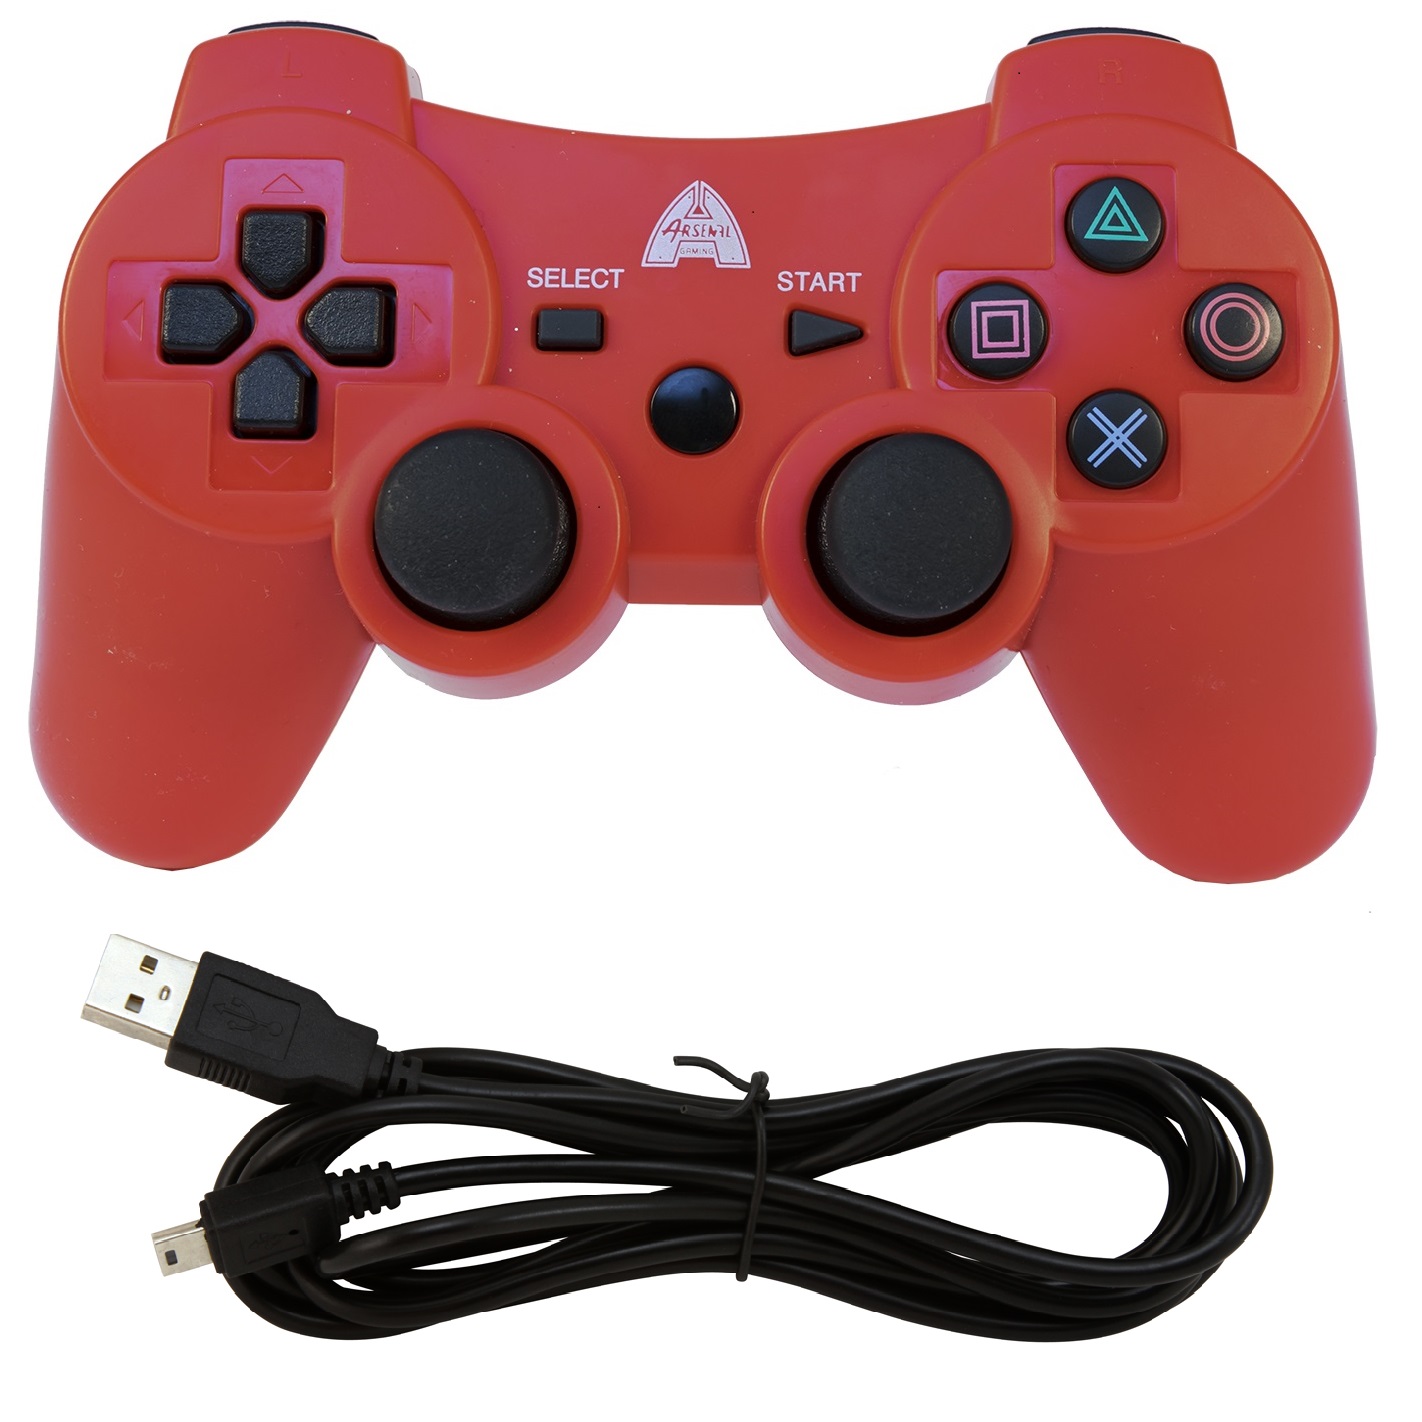 Arsenal Gaming PlayStation3 Wireless Rechargeable Bluetooth Controller, Red ap3con4r - image 2 of 2